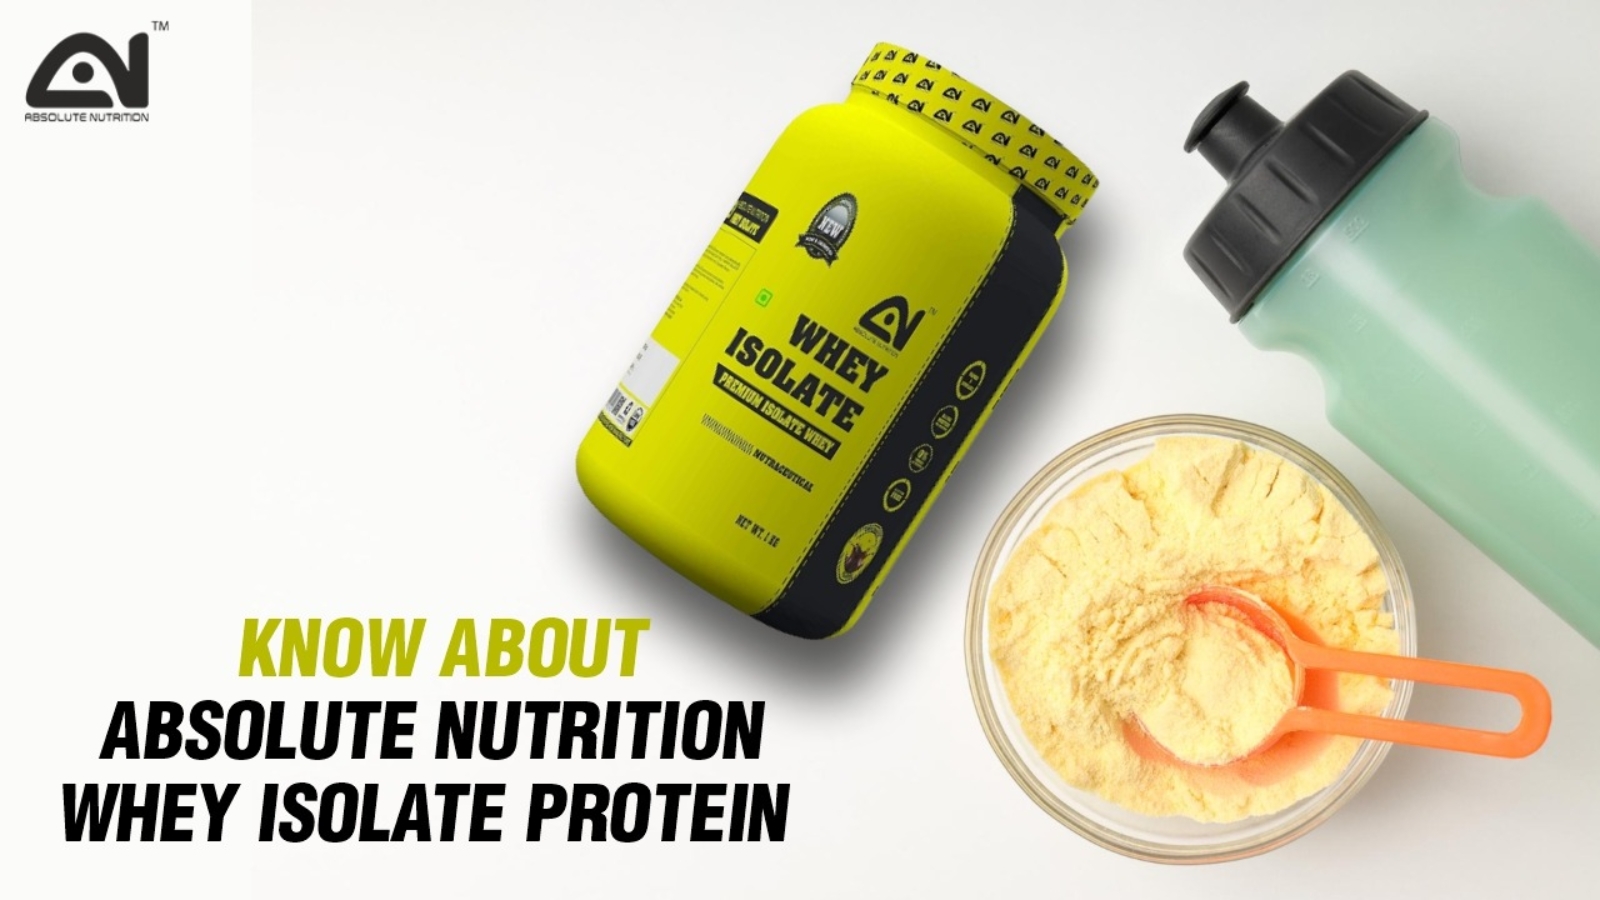 Absolute Nutrition whey isolate protein